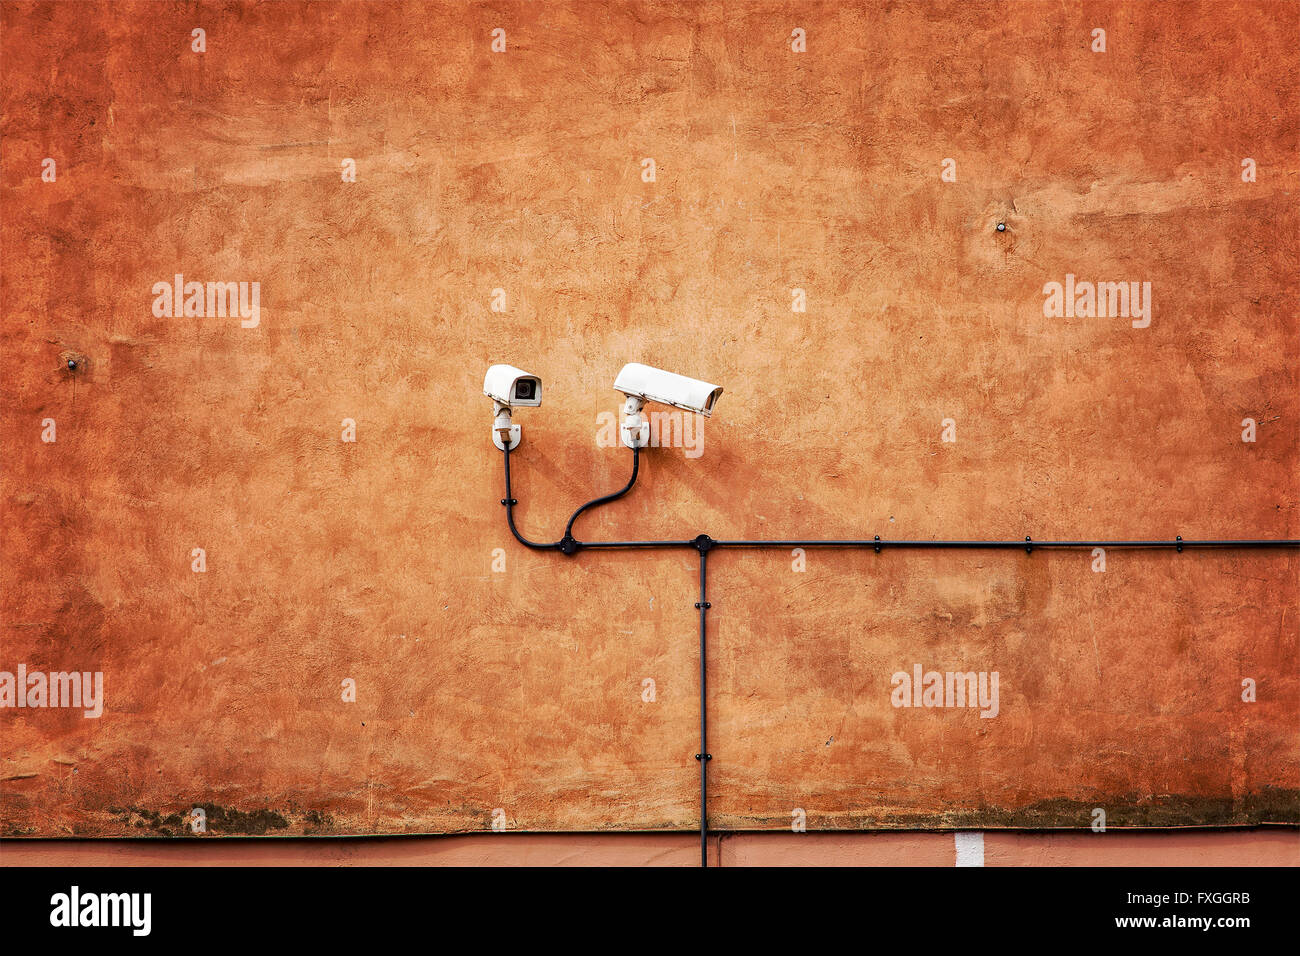 Image of security cameras on orange wall. Stock Photo